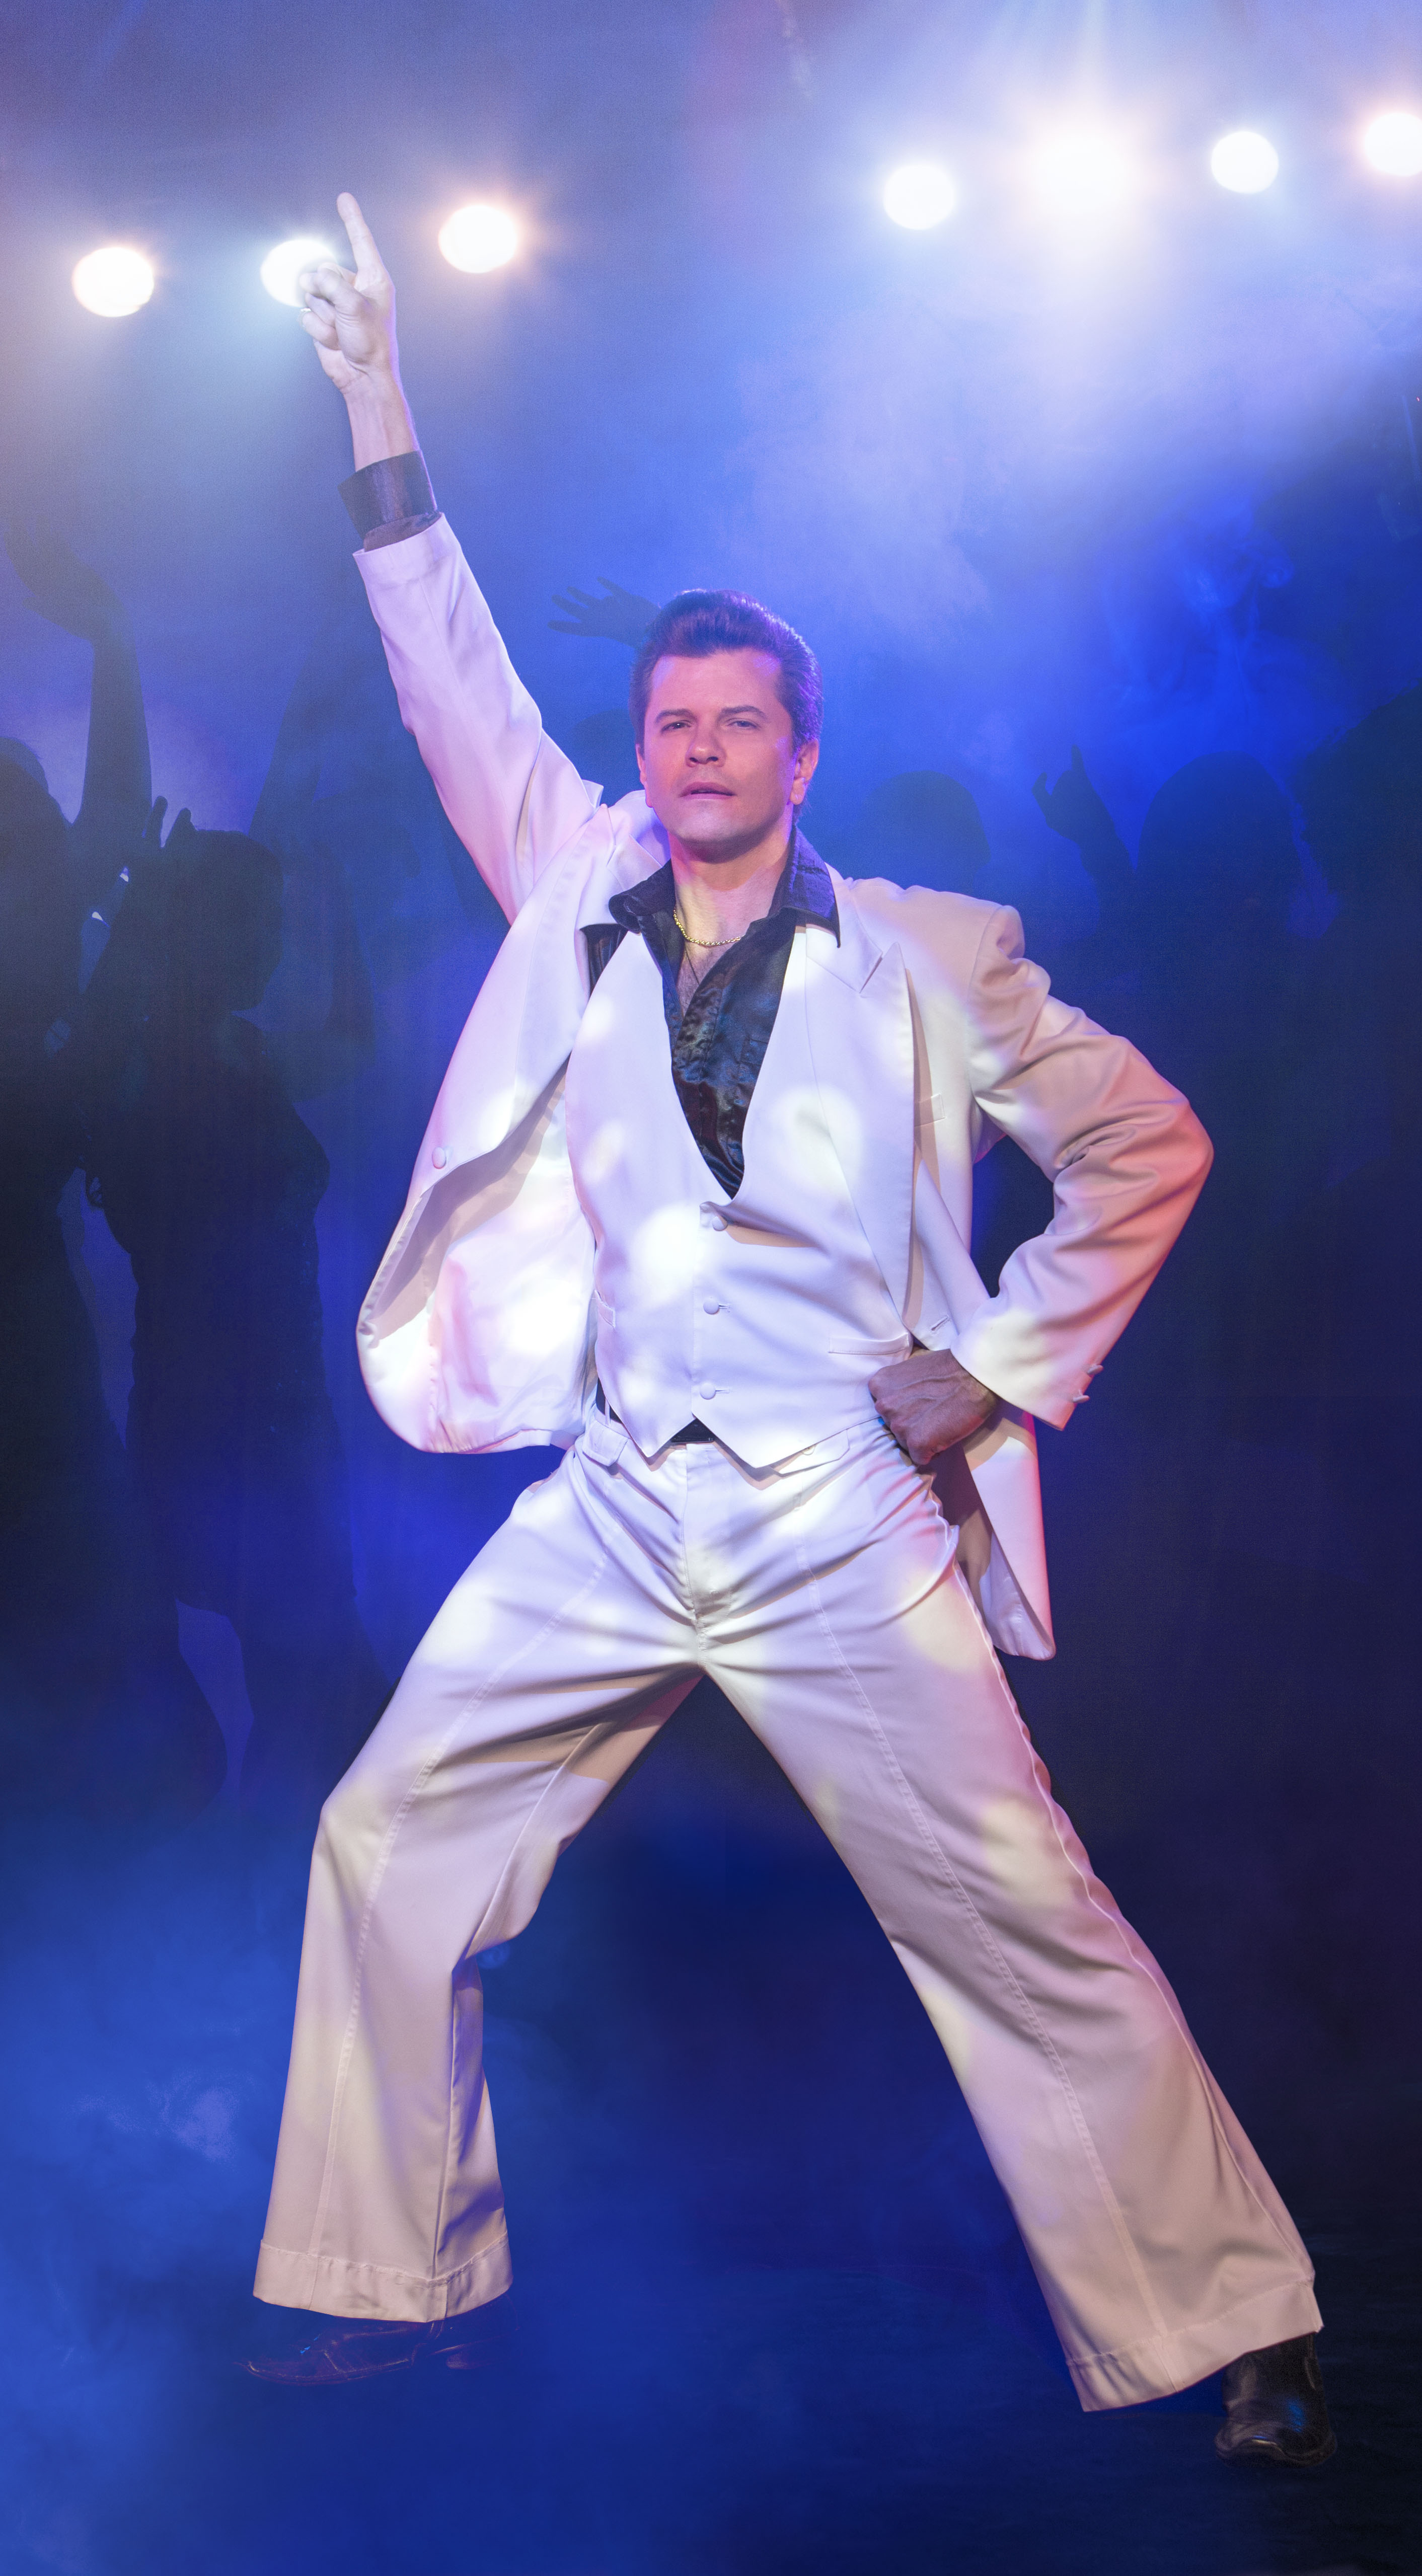 Saturday Night Fever - The Musical, South Miami-Dade Cultural Arts Center, 3/19/16